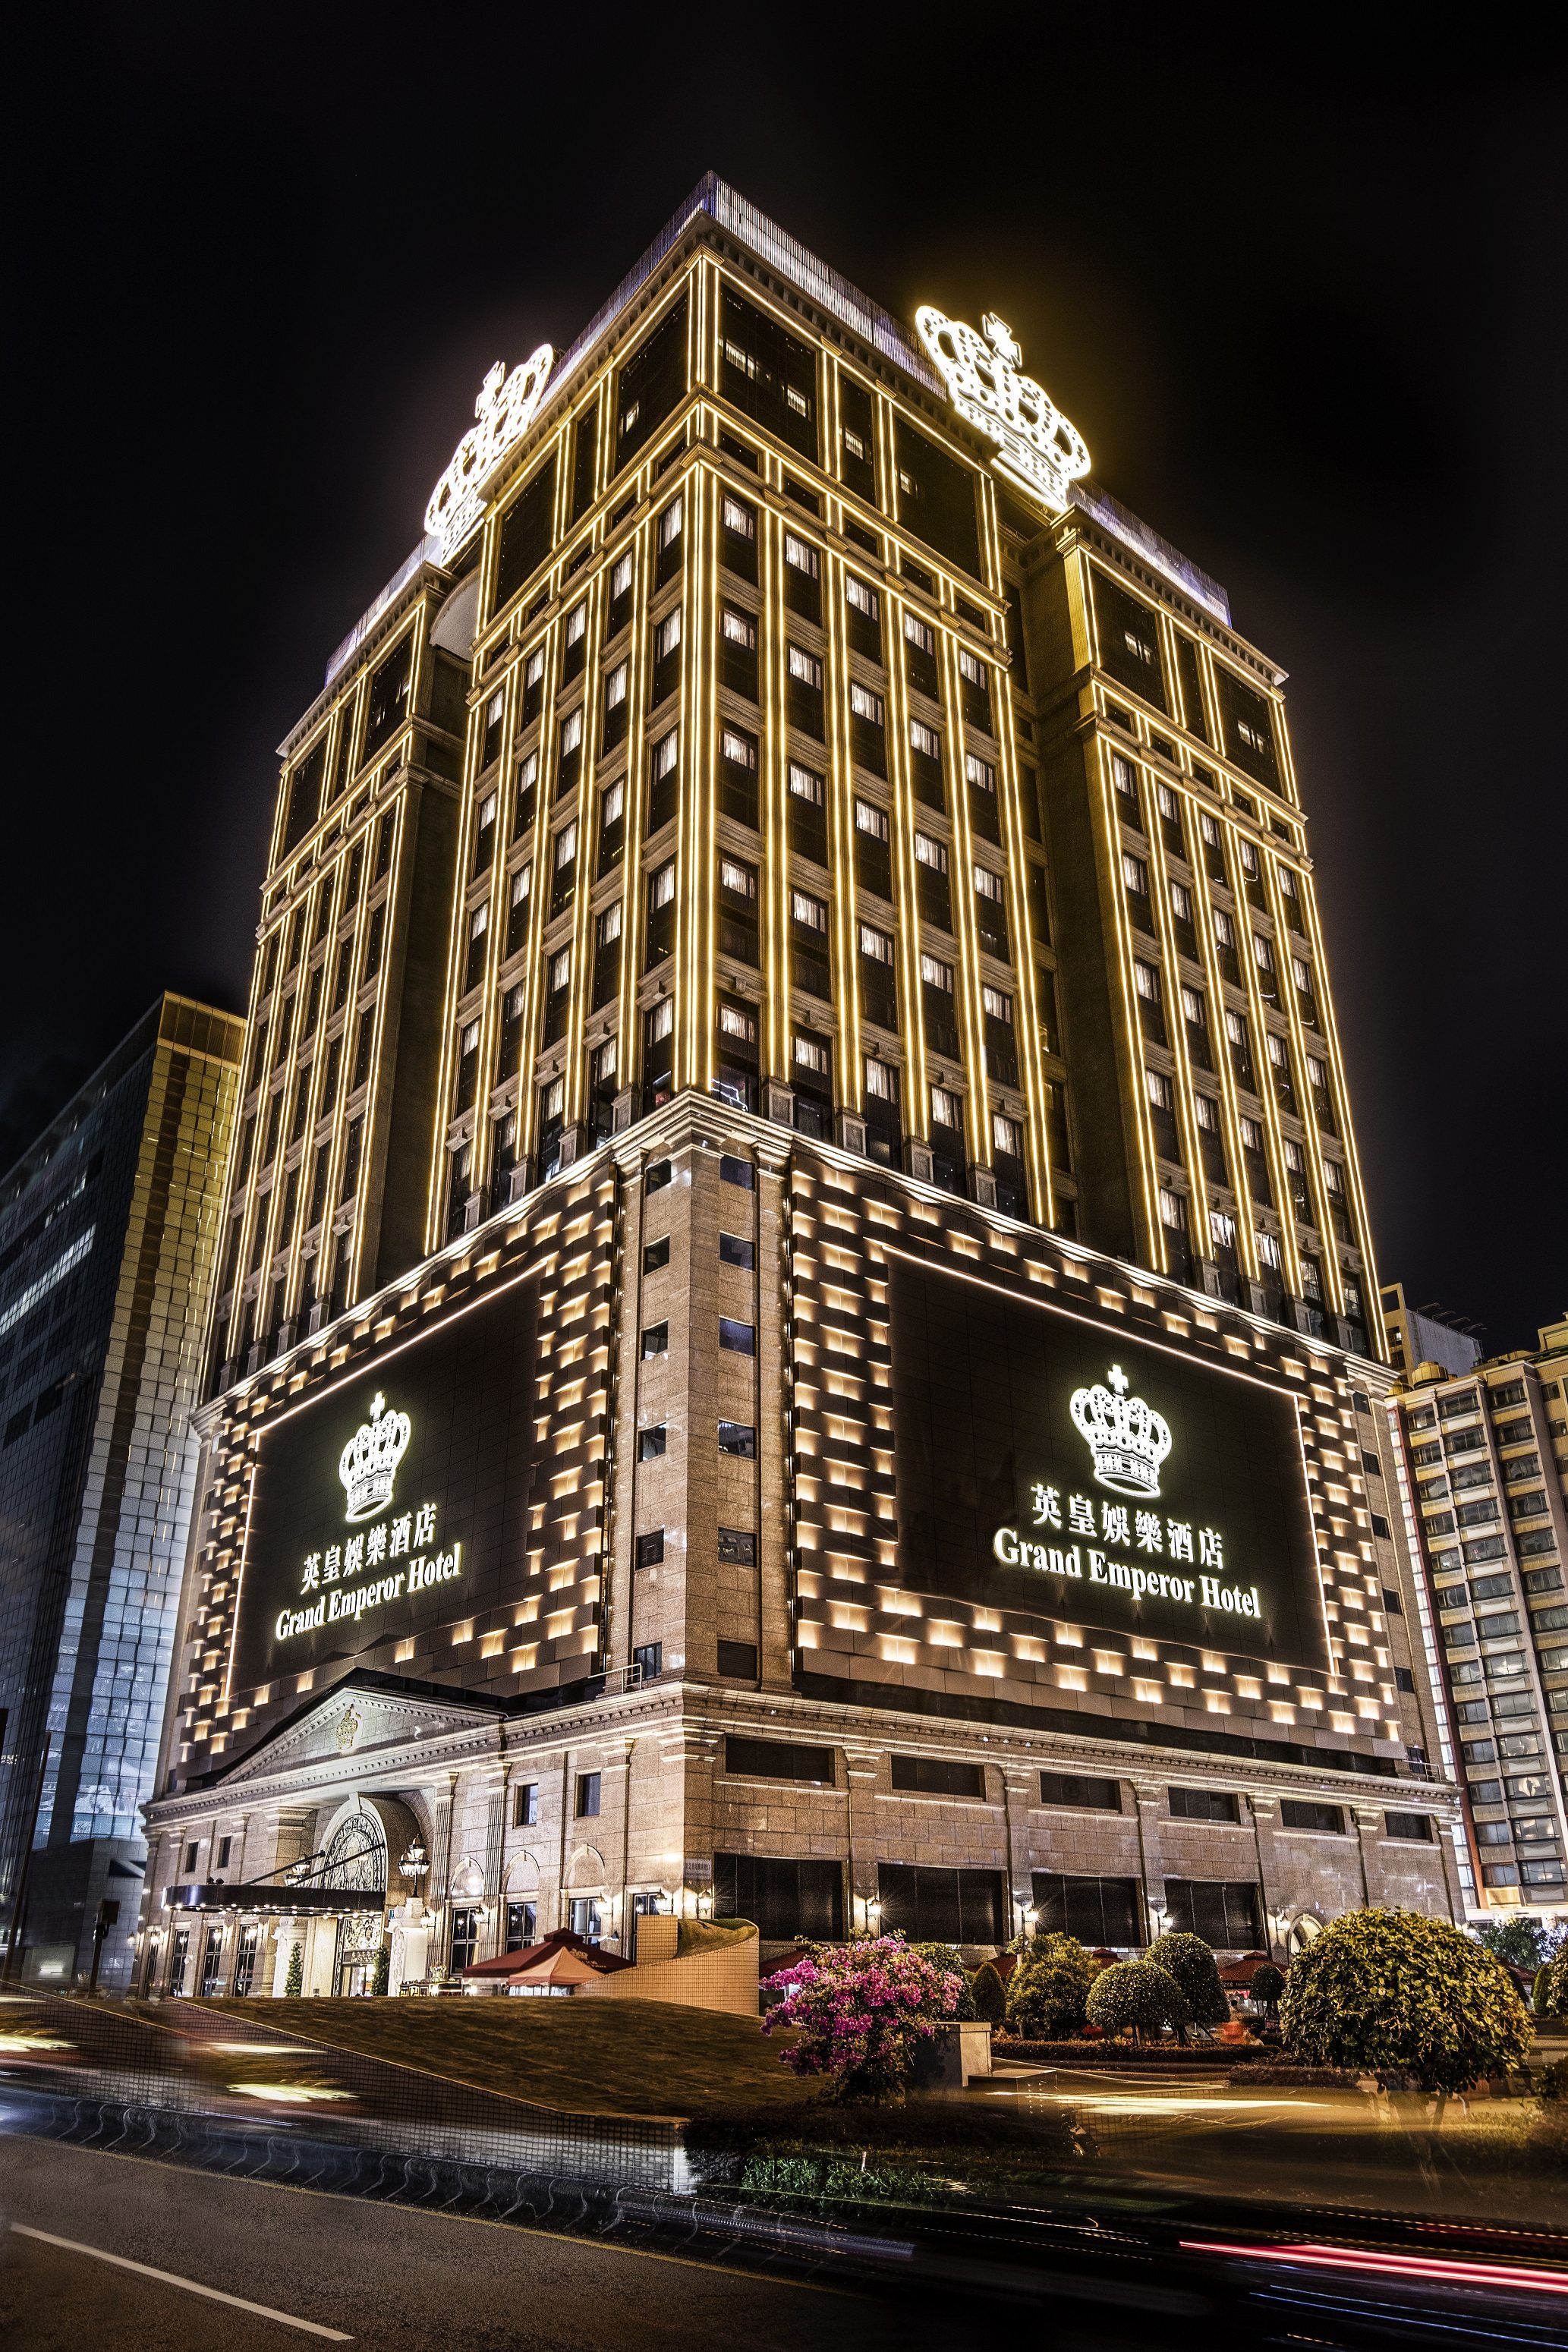 The exterior of the Grand Emperor Hotel in Macau. Photo: Handout